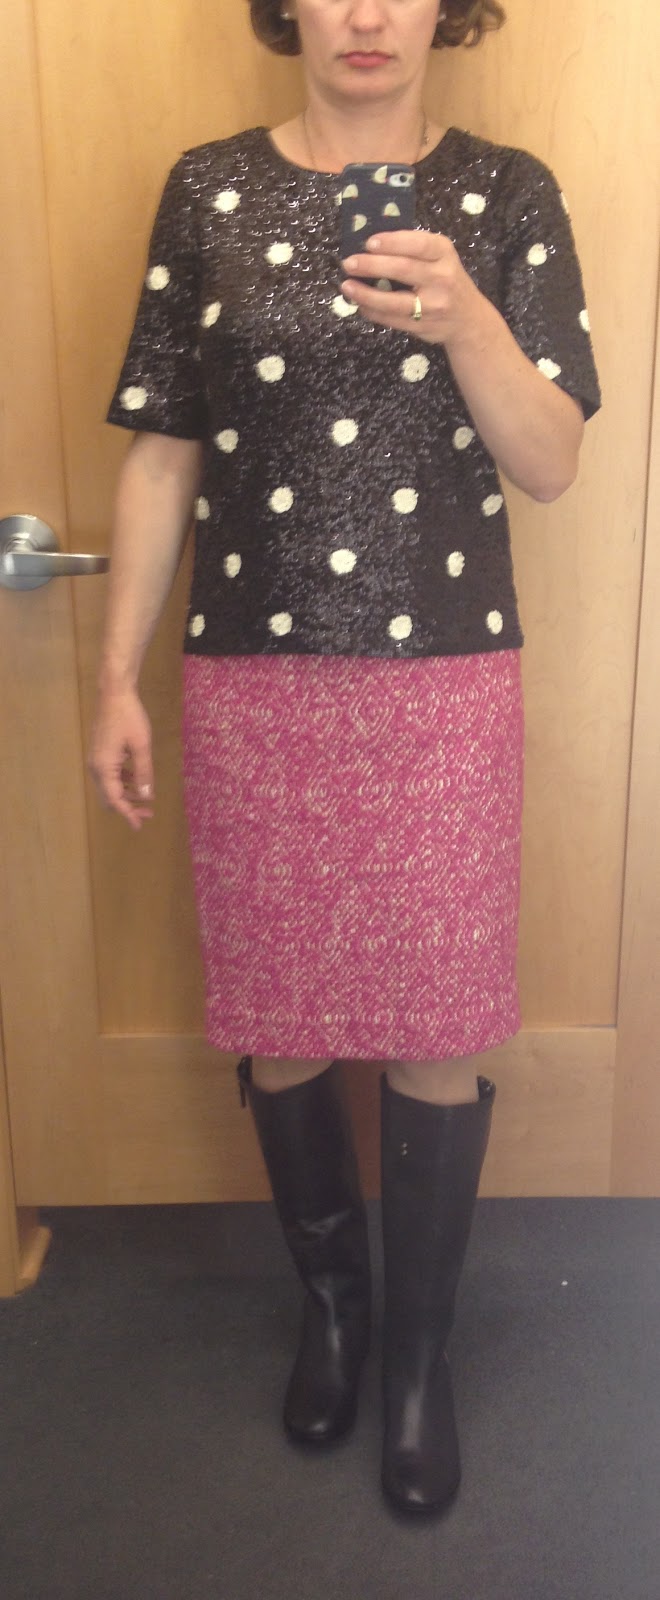 A JC Shopping Habit: Polka dots, tweed skirt and Harper boots